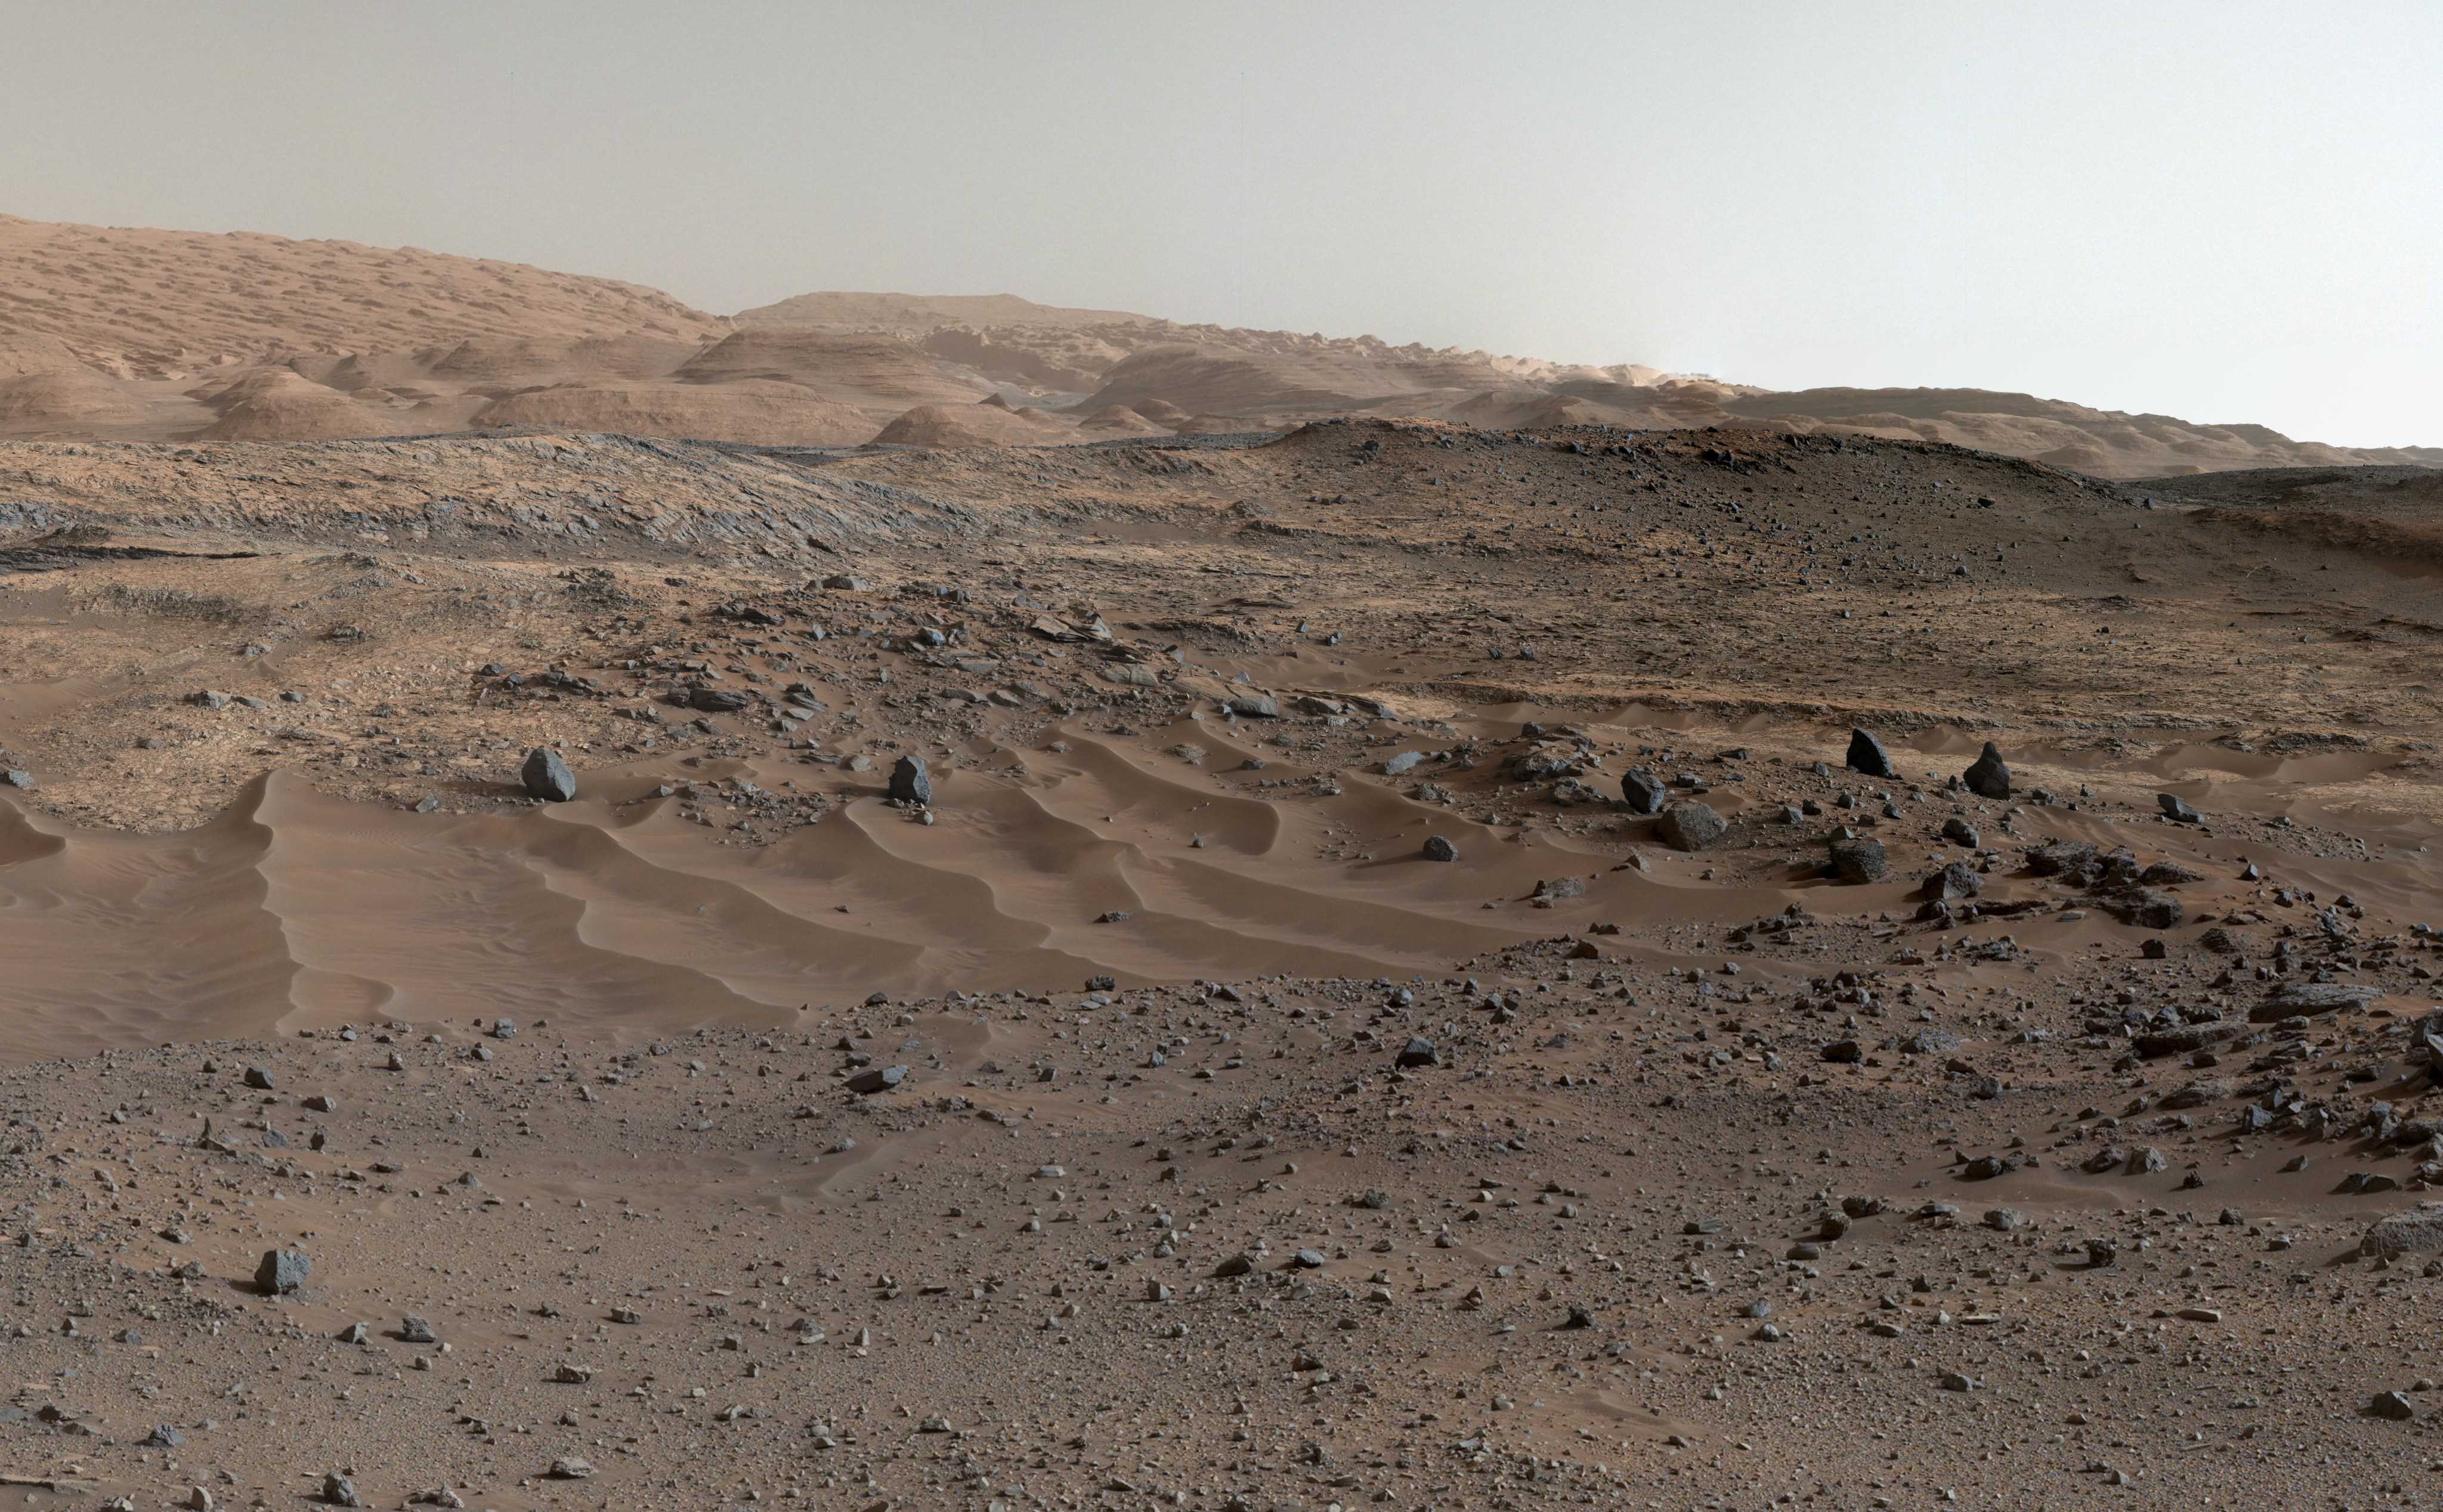 A panorama combining images from both cameras of the Mastcam on NASA's Curiosity Mars Rover shows diverse geological textures on Mount Sharp. Three years after landing on Mars, the mission is investigating this layered mountain for evidence about changes in Martian environmental conditions.